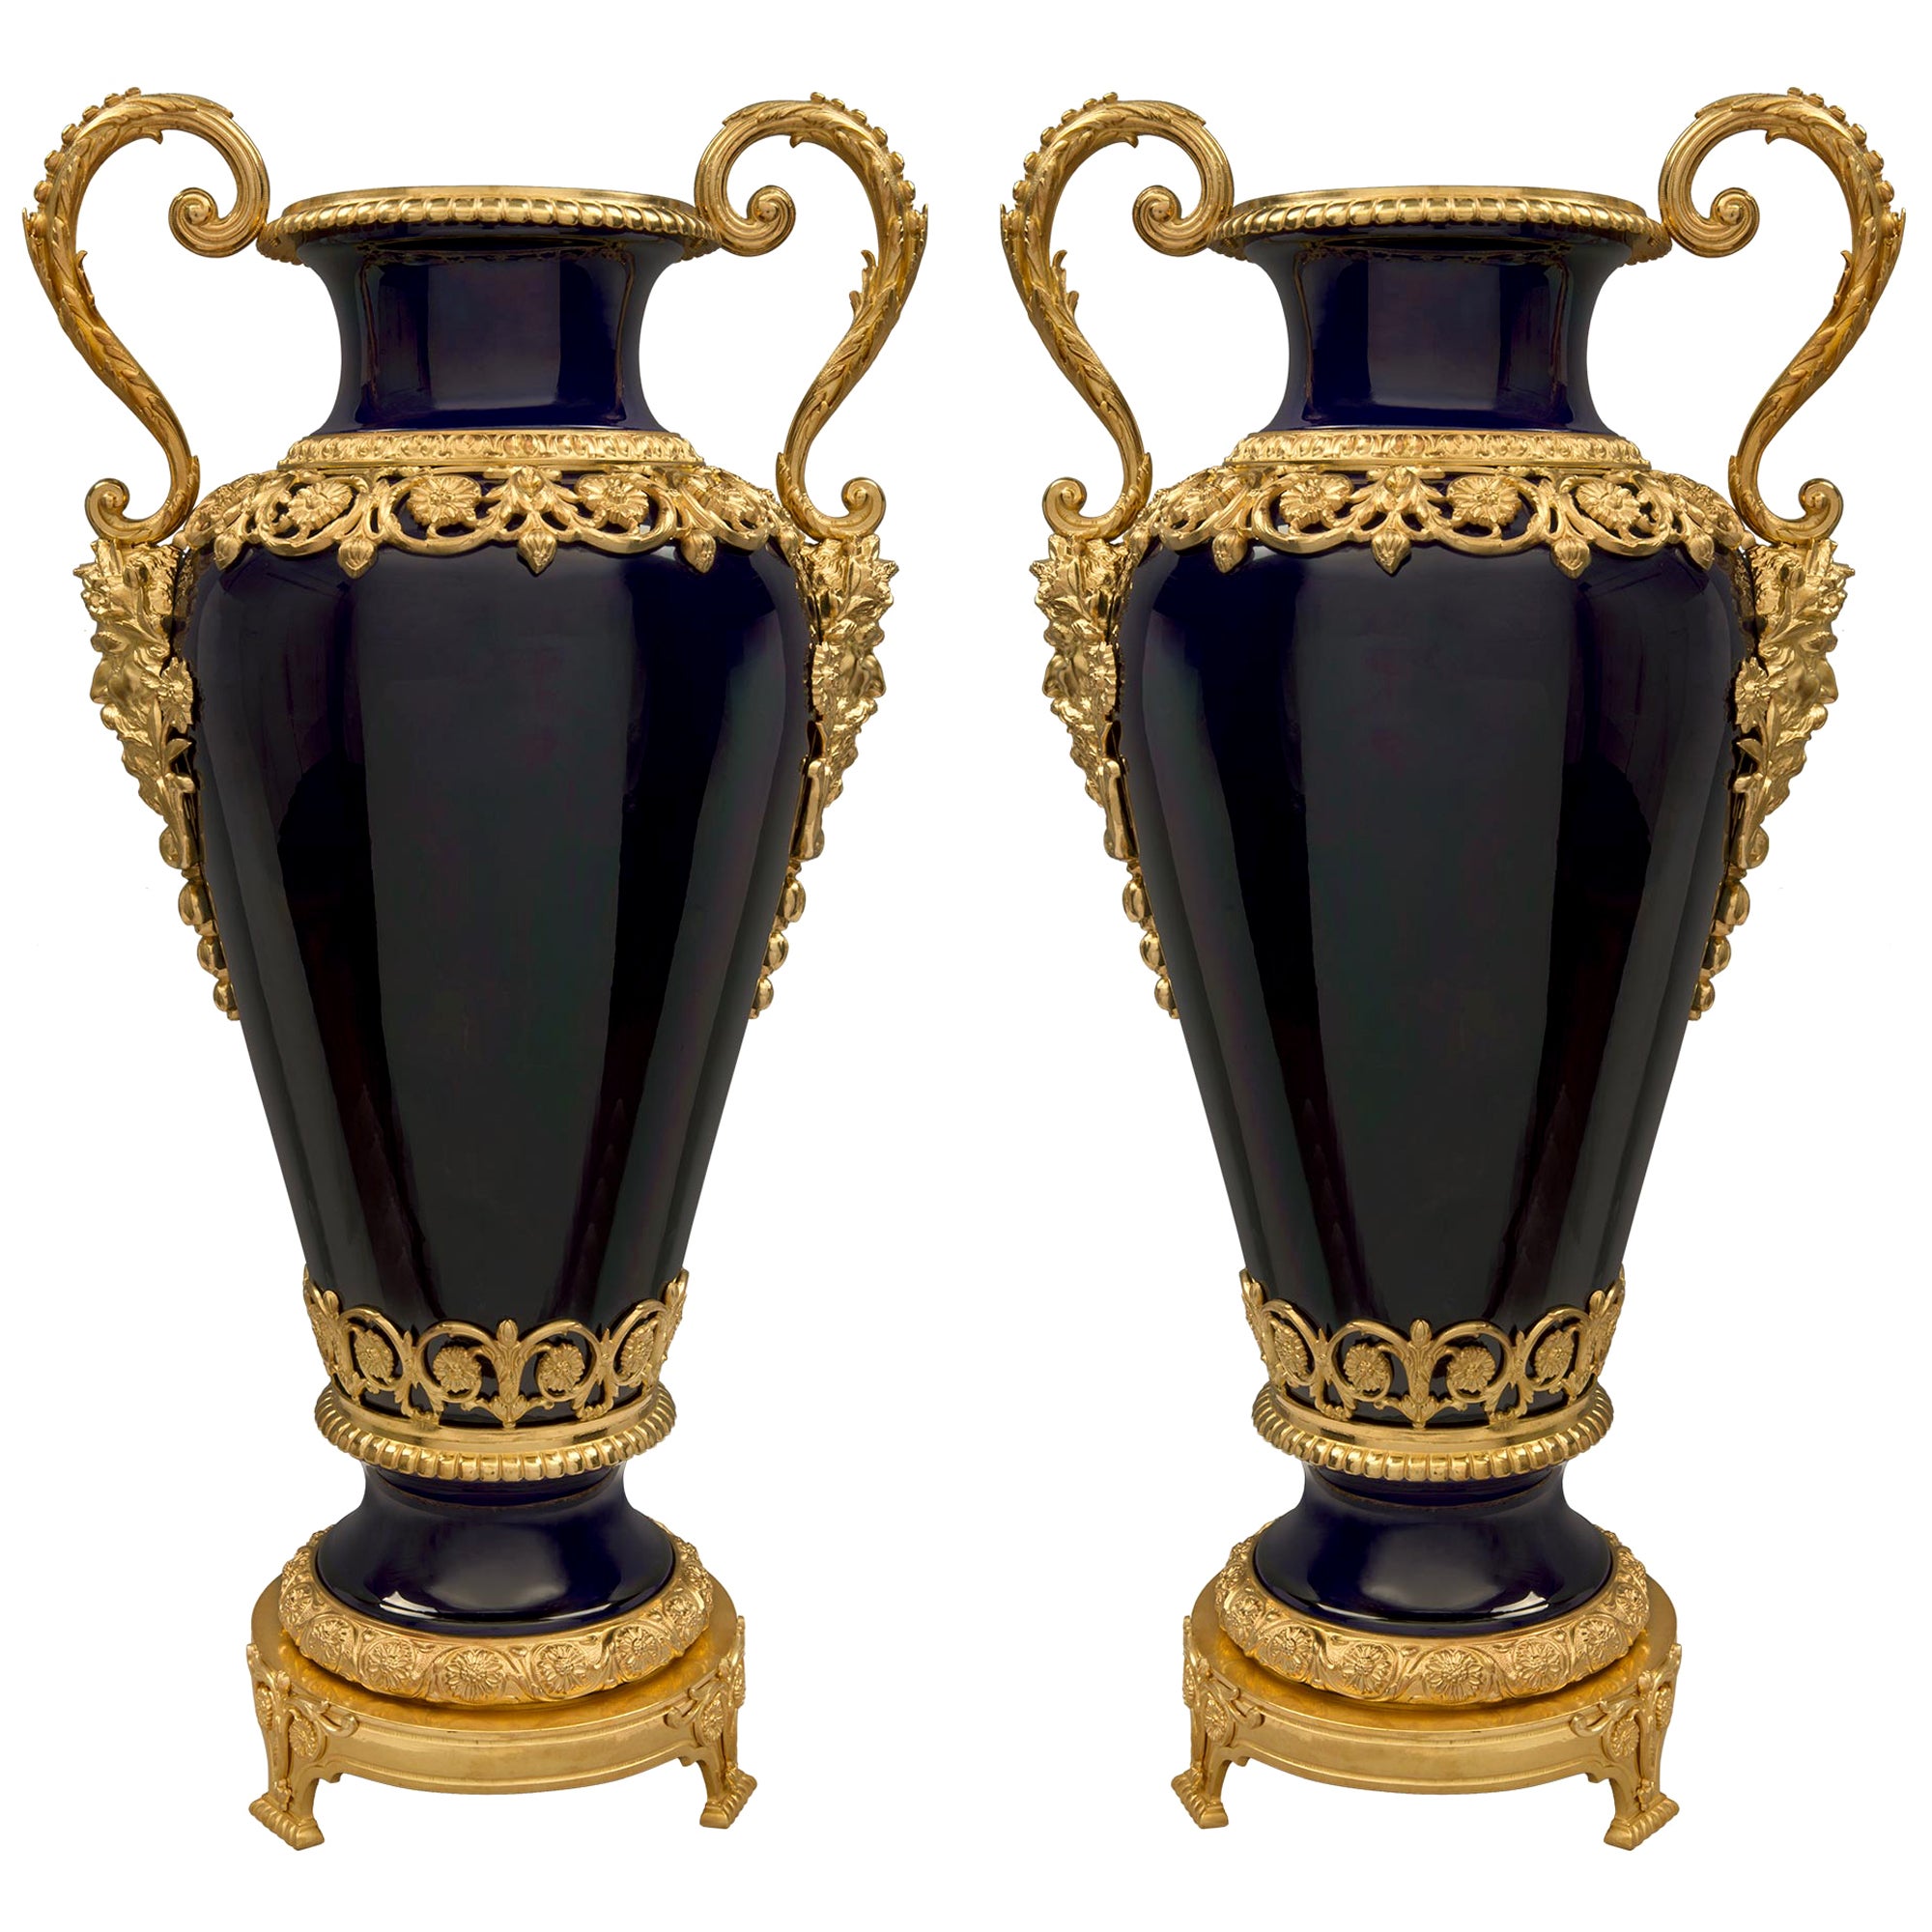 Pair of French 19th Century Louis XVI Style Sèvres Porcelain and Ormolu Vases